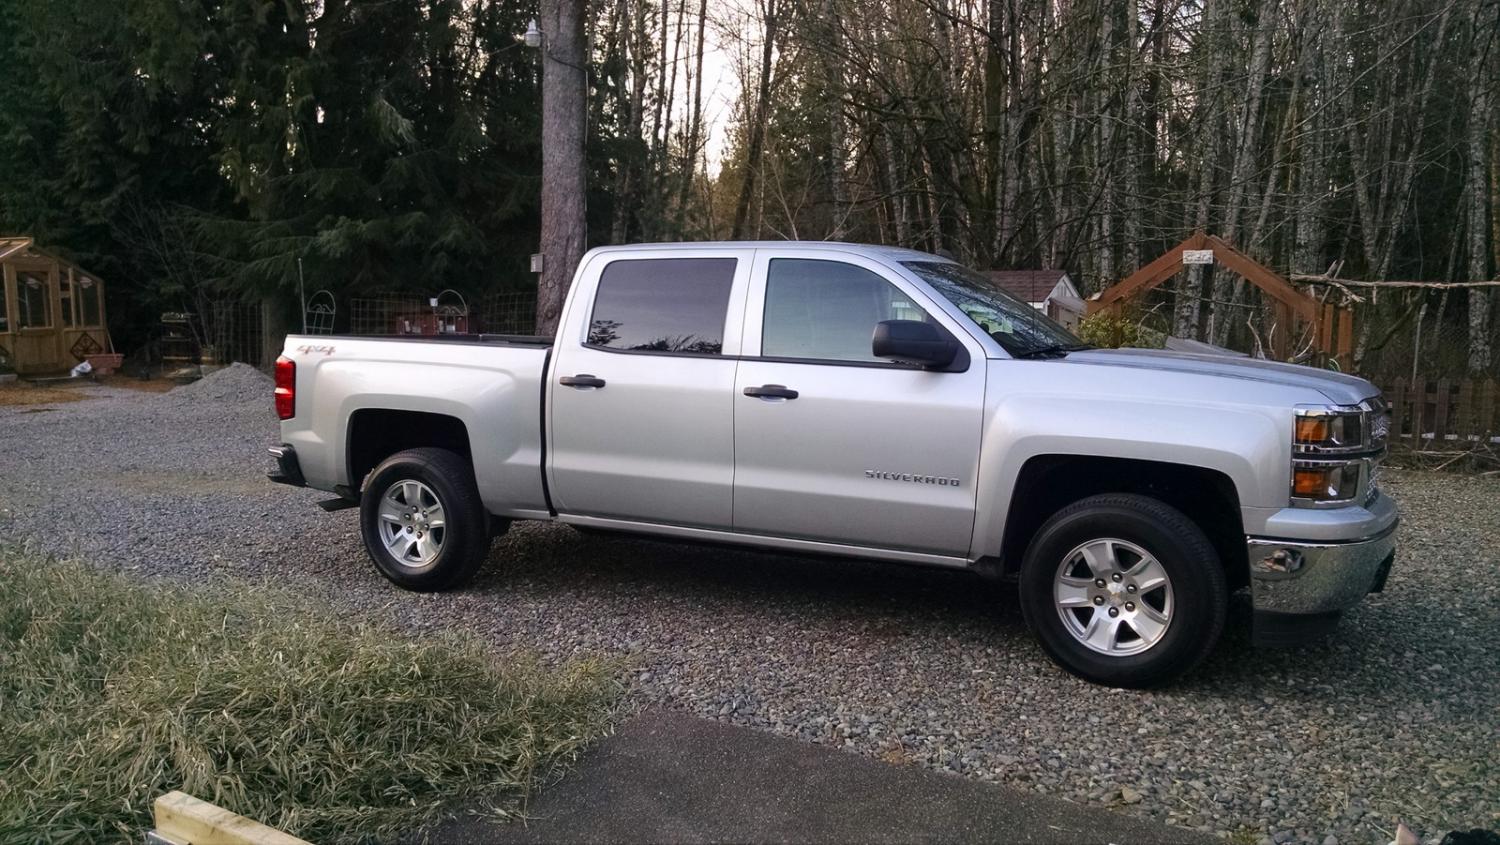 Certified preowned gmc trucks